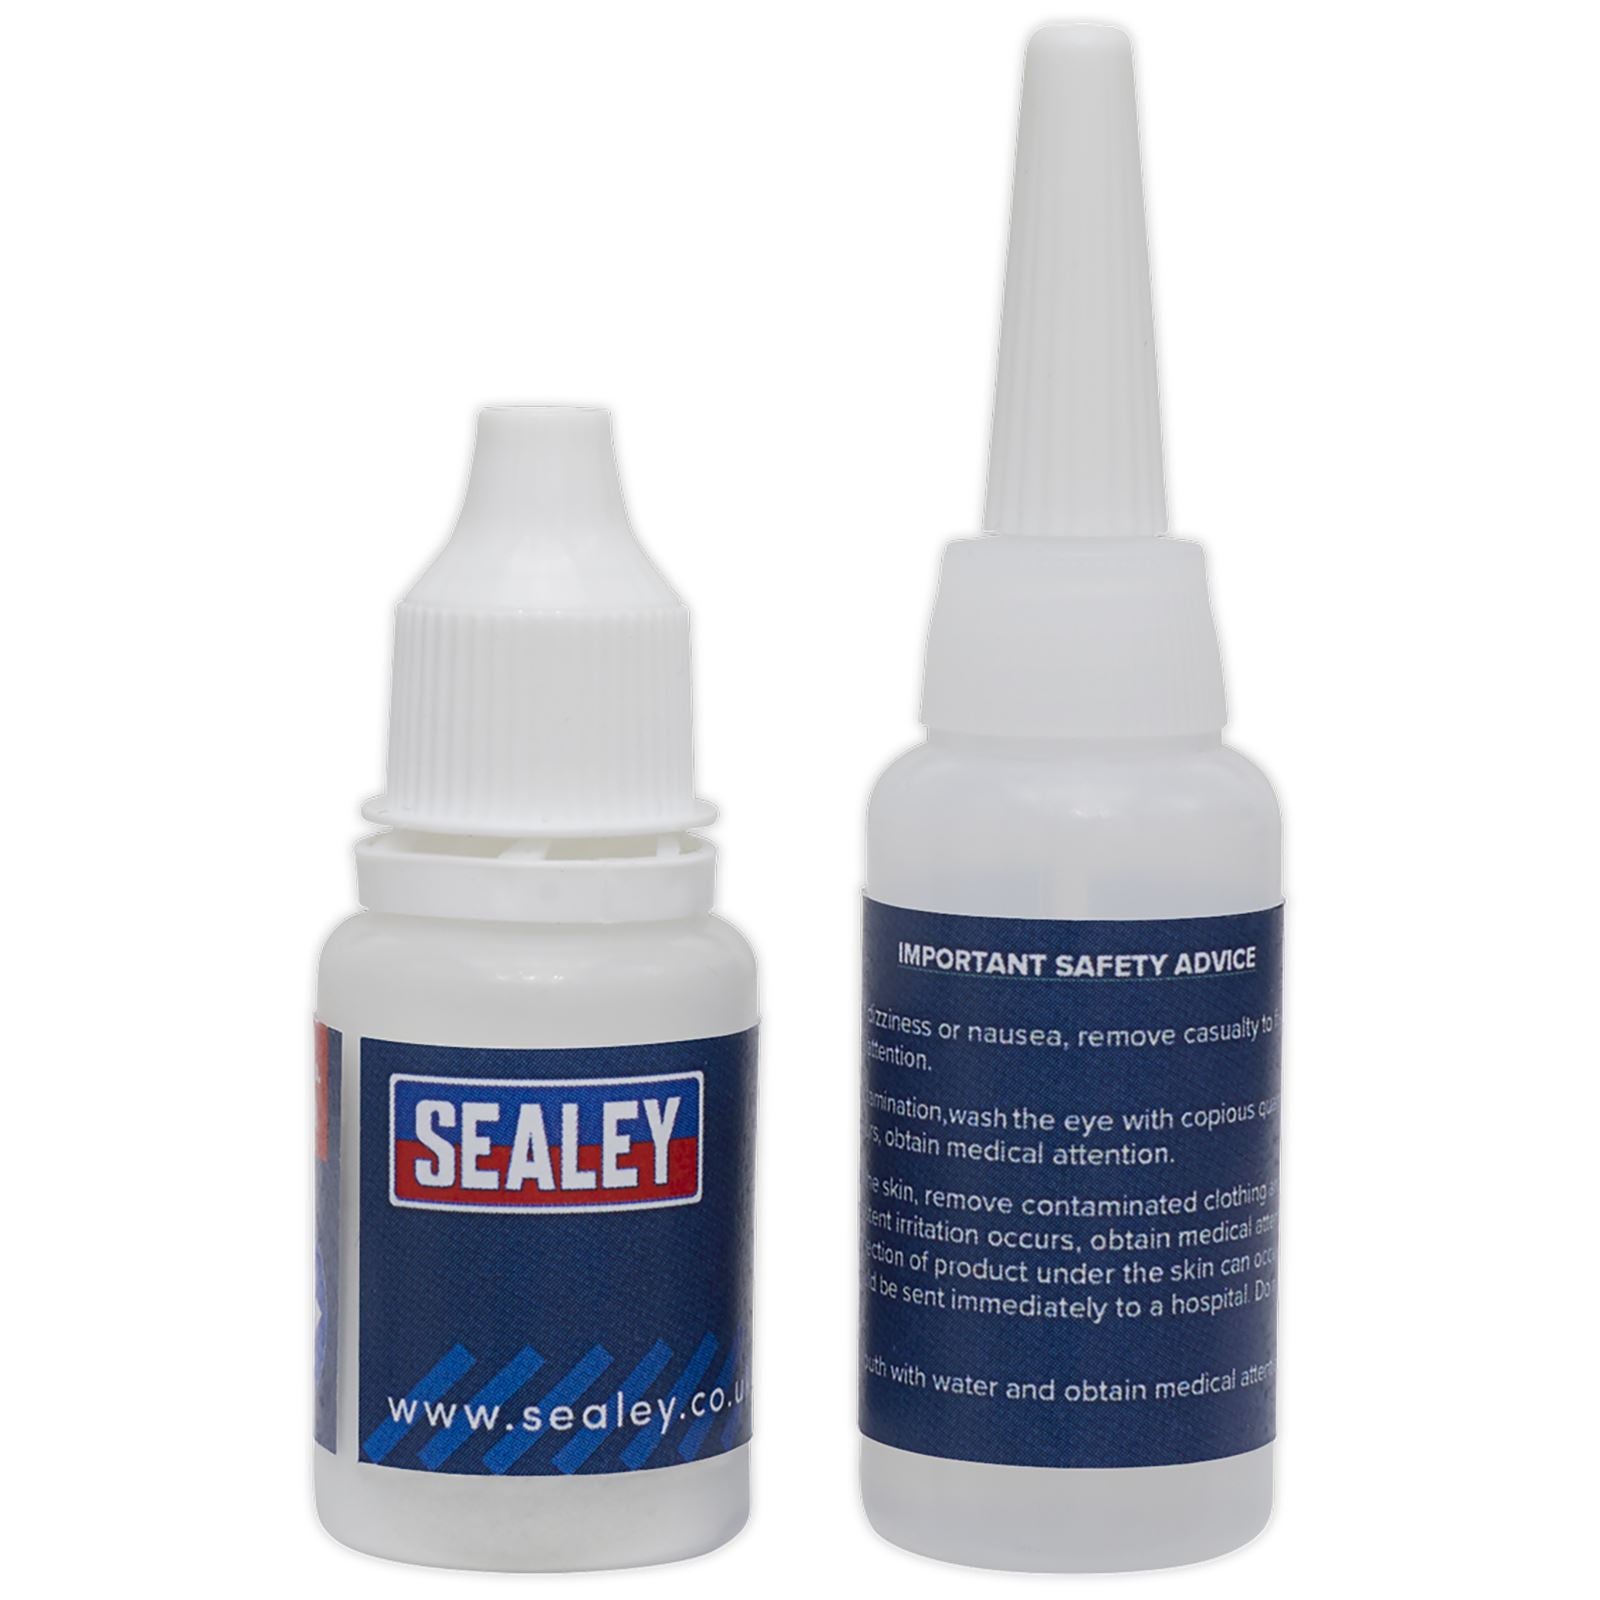 Sealey Fast Fix Filler and Adhesive Two Part Repair System White